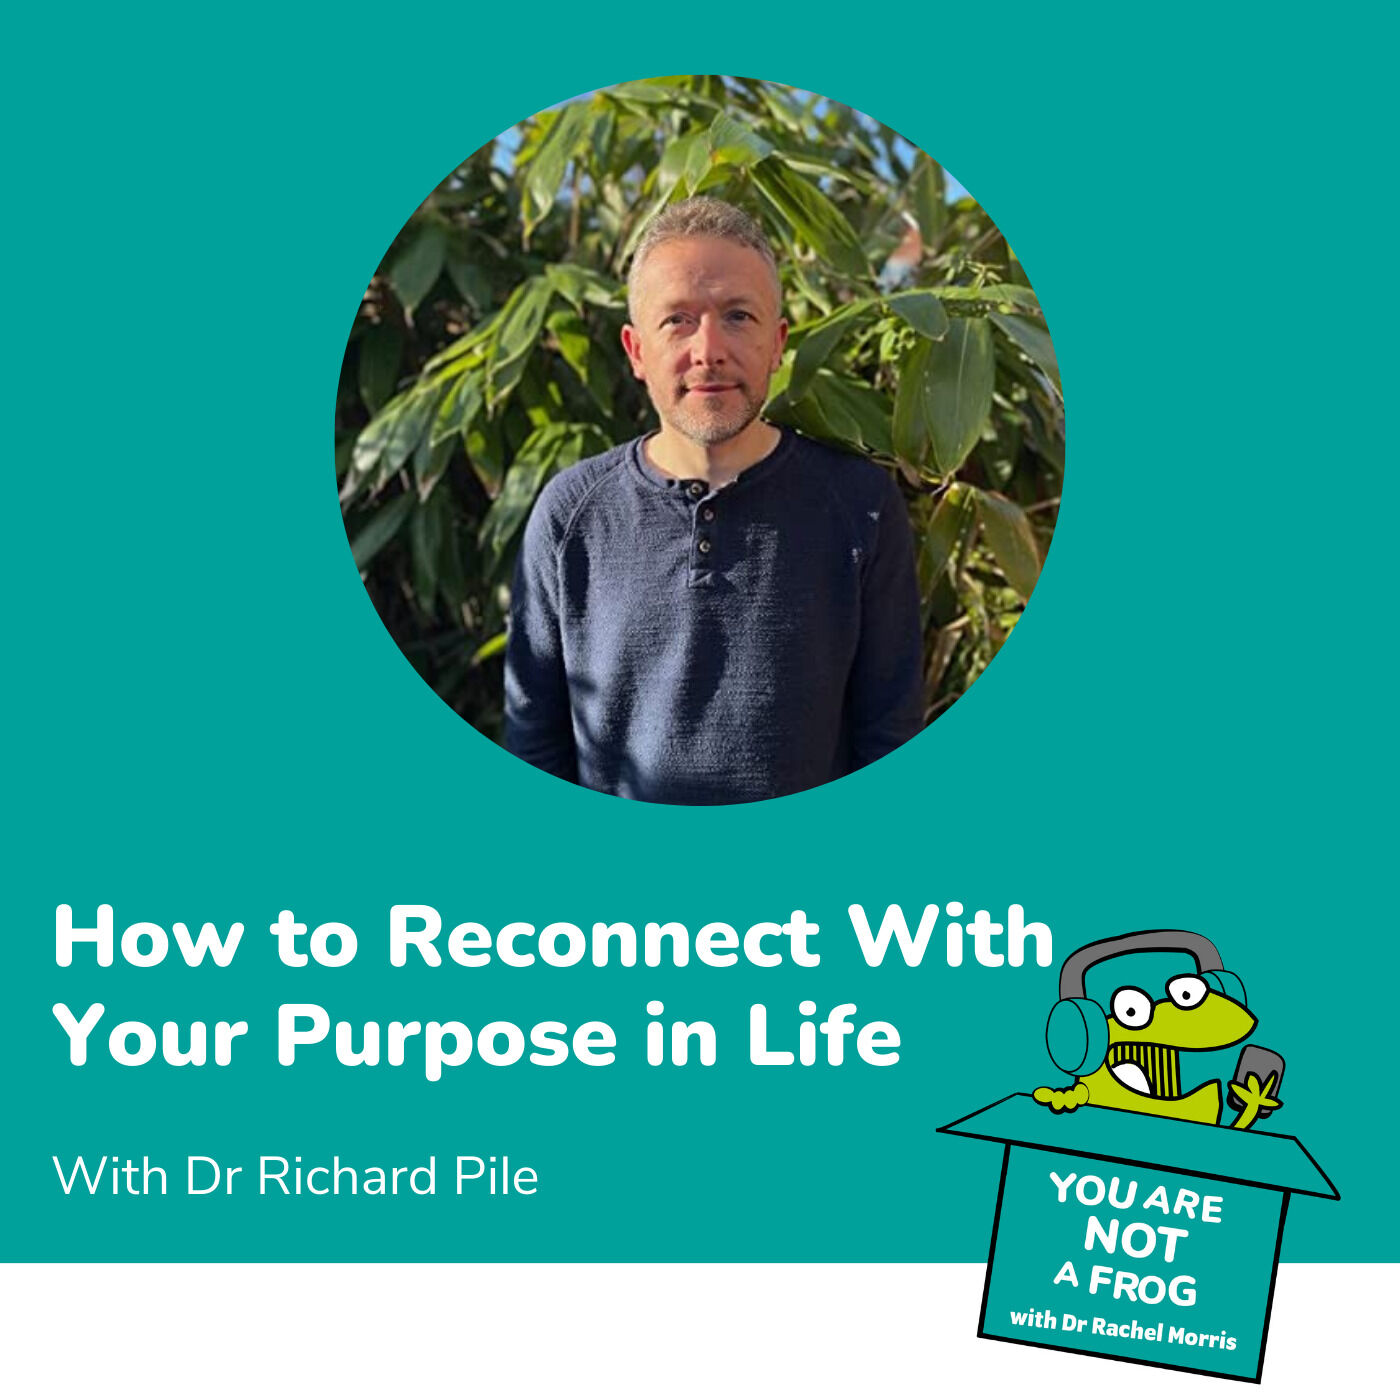 How to Reconnect With Your Purpose in Life with Dr Richard Pile